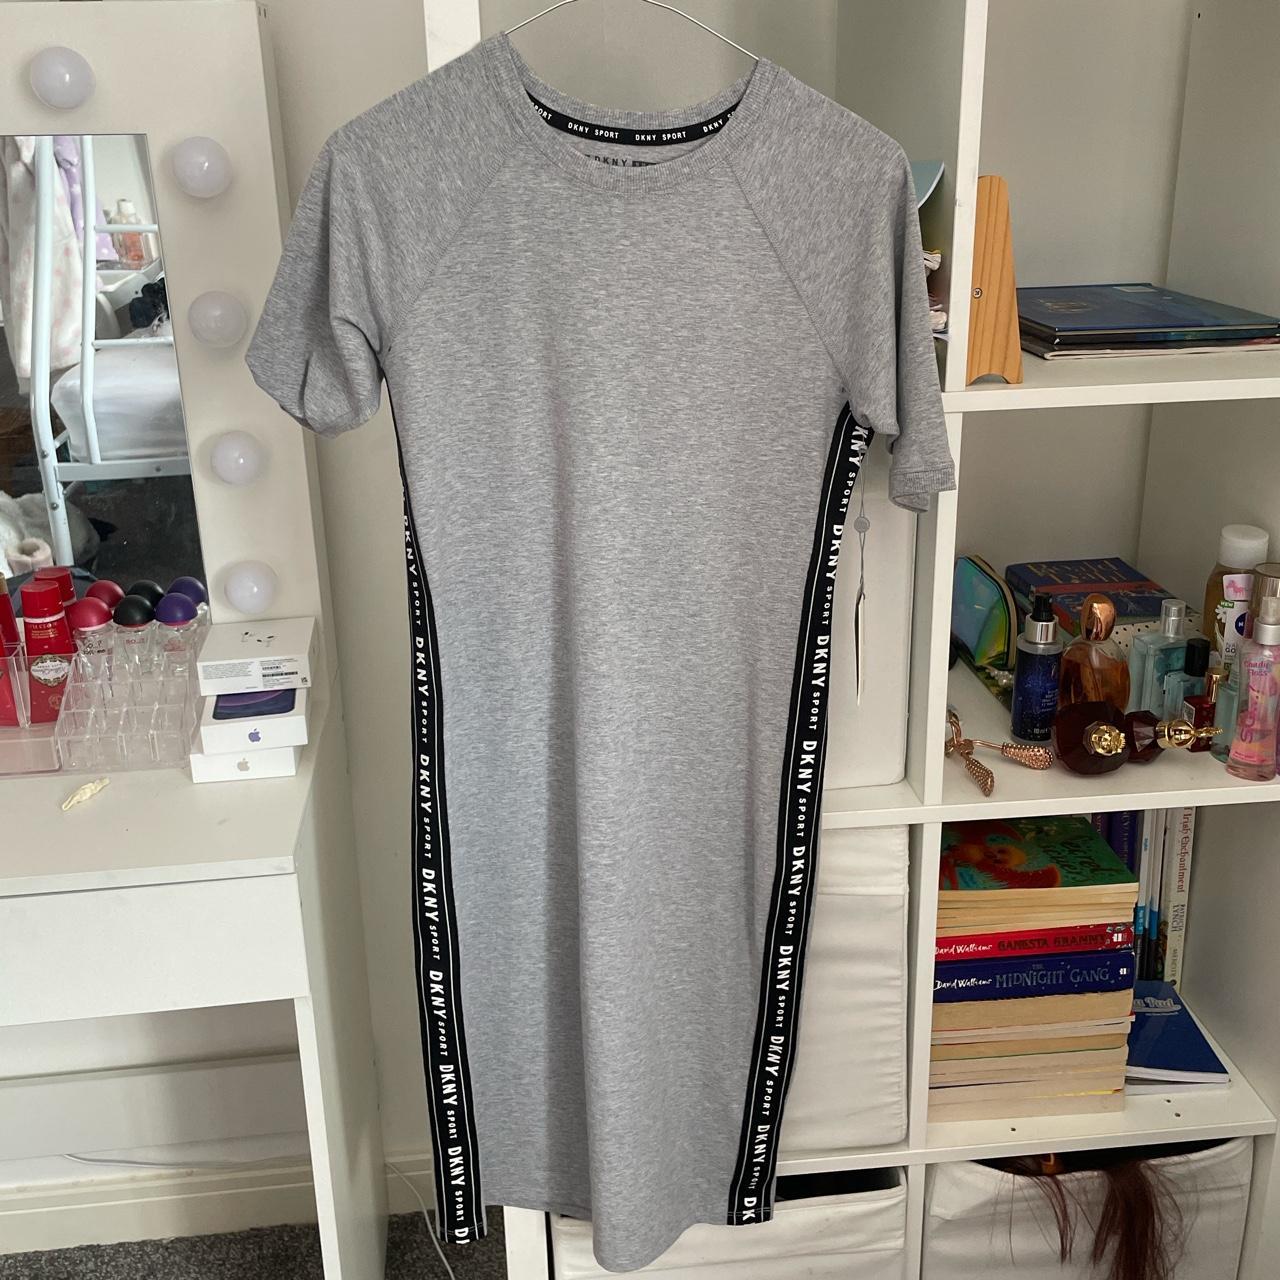 DKNY SPORT dress for sale. Brand new with tags. Size - Depop